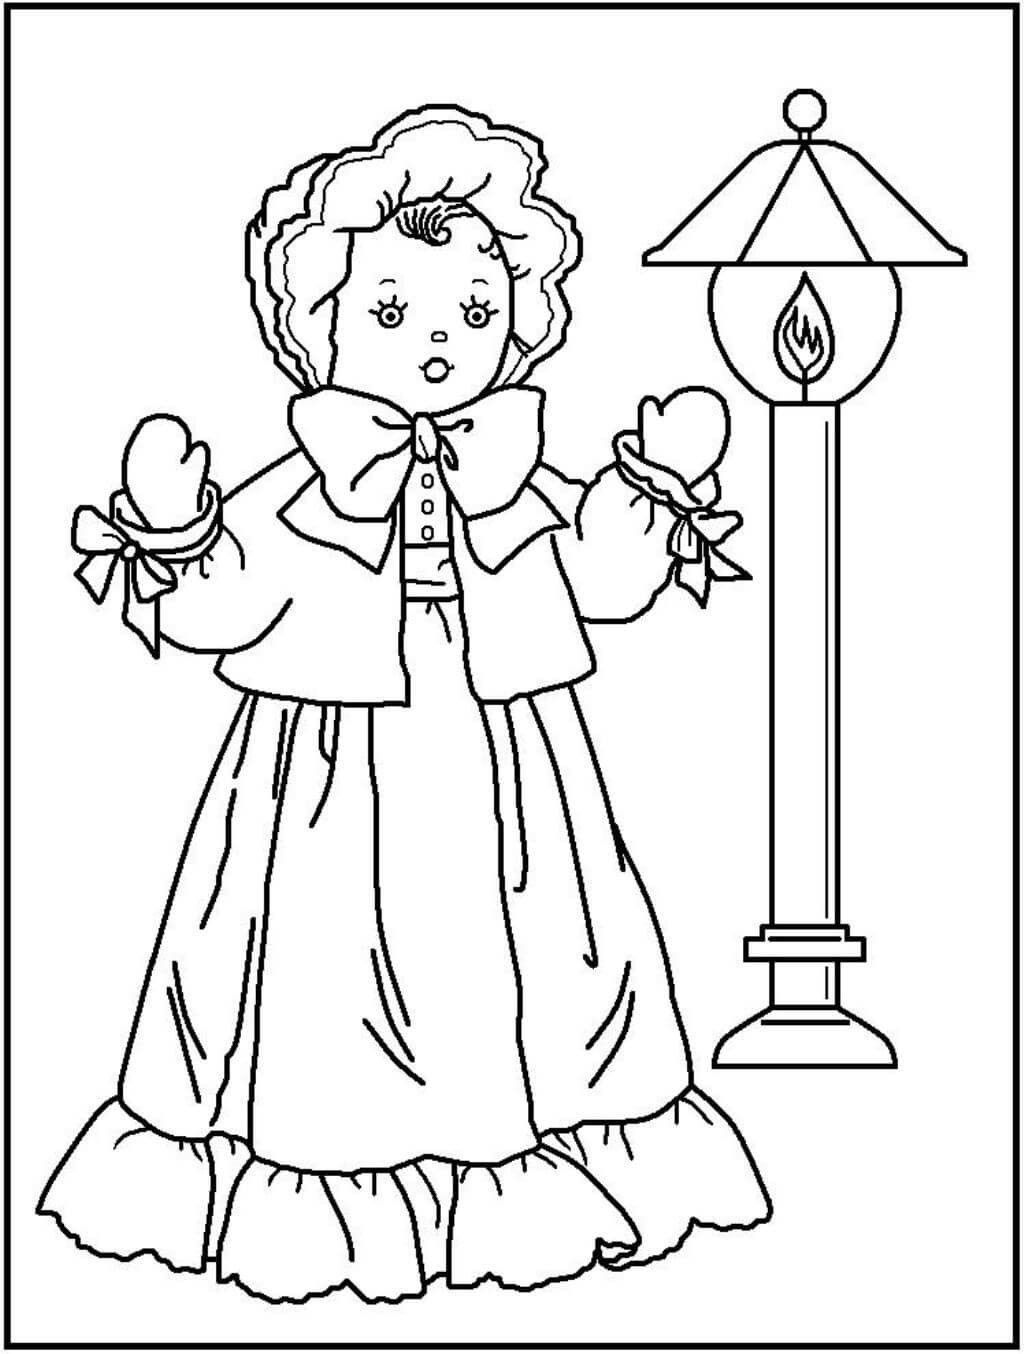 American Girls Coloring Pages
 Coloring Pages American Girl Doll